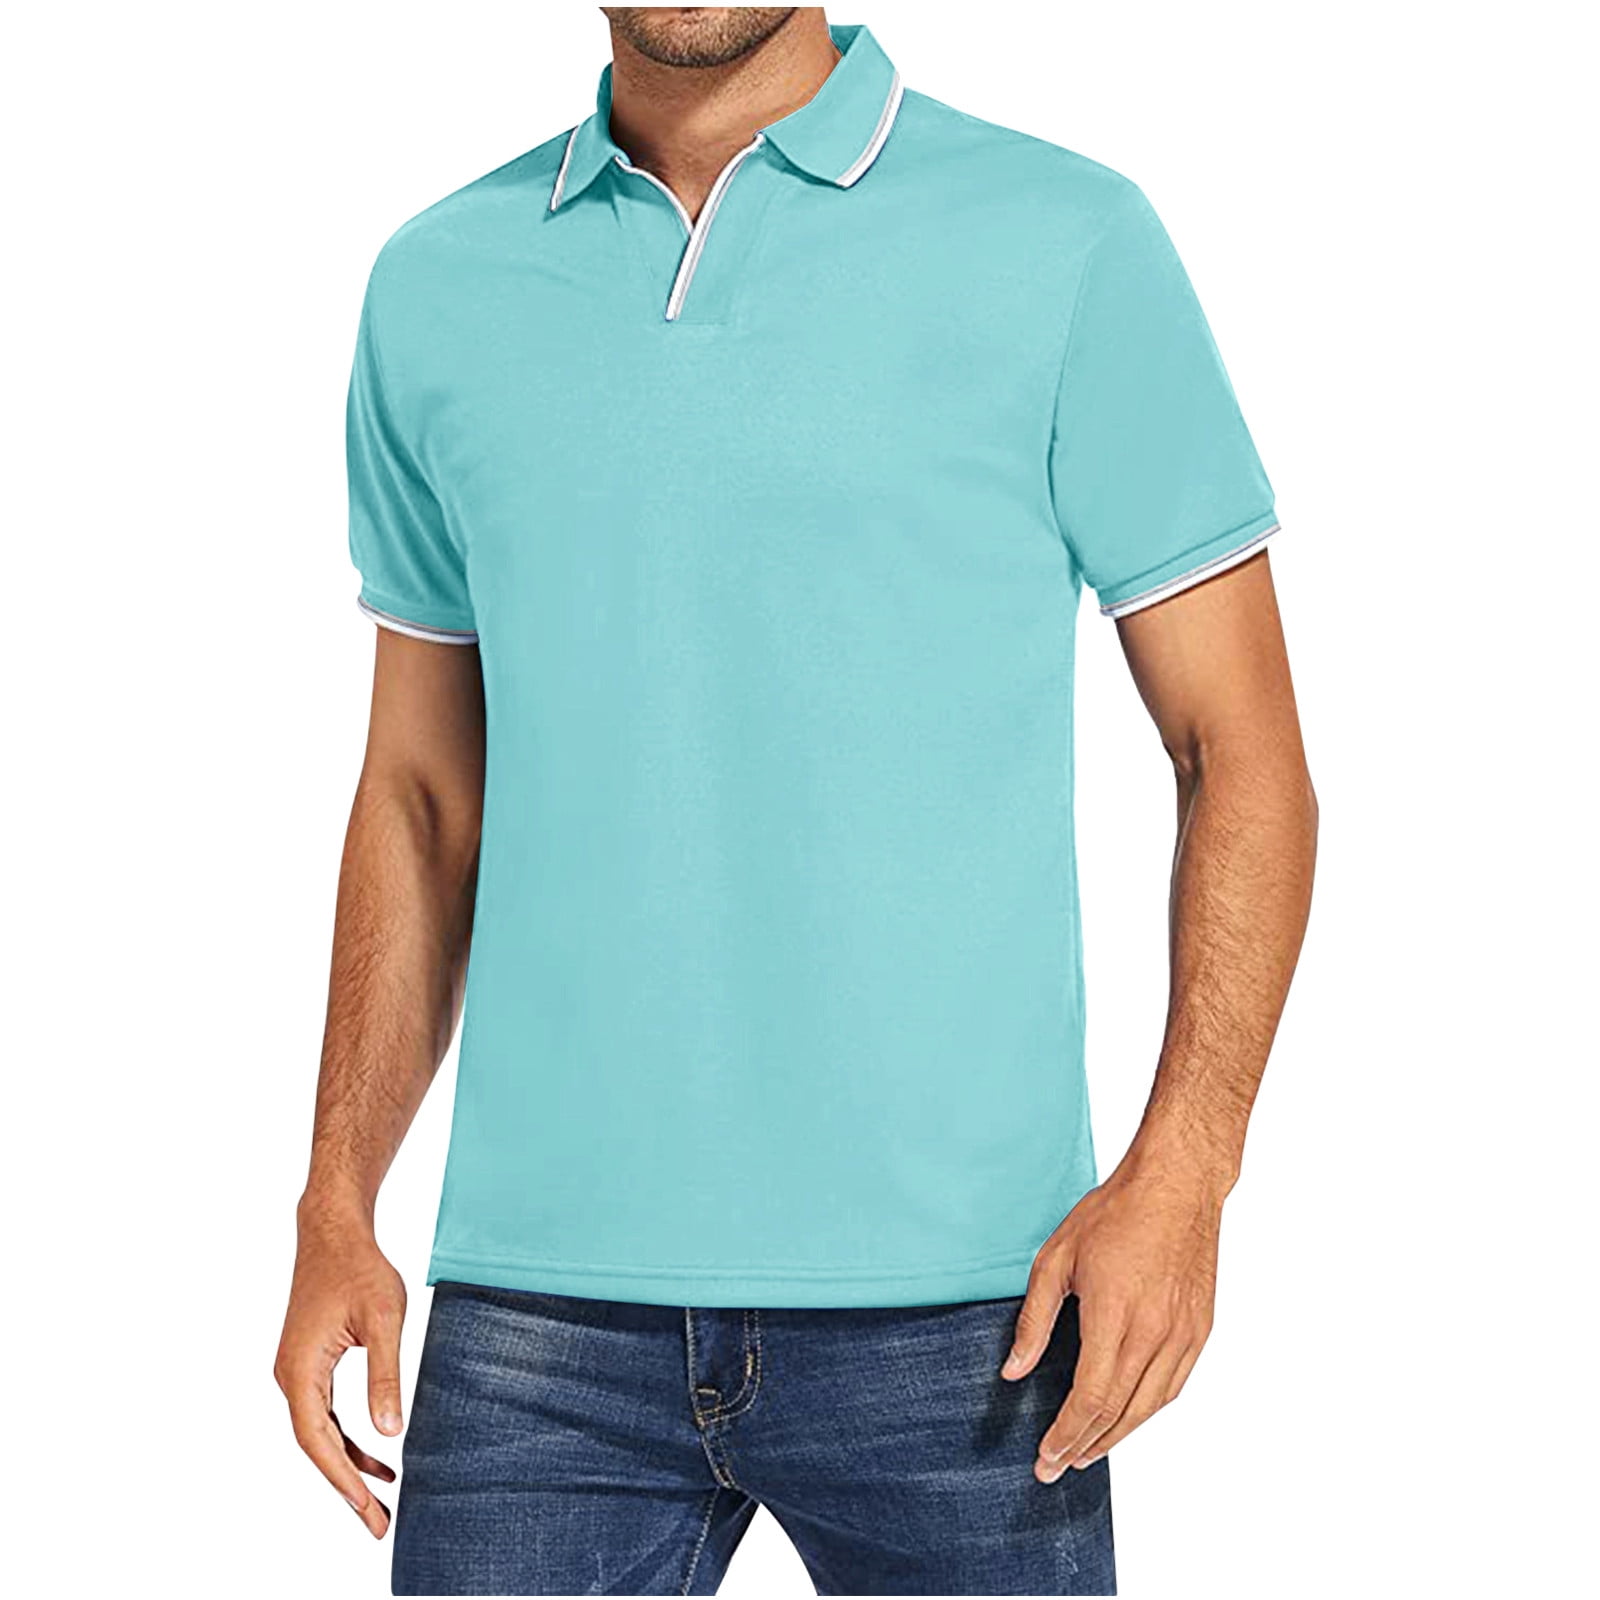 Polo Shirts for Men Casual Short Sleeve Golf Polos Classic Fit Athletic  Tshirt Collared Dress Shirt Tennis Tops (X-Large, Light Blue)